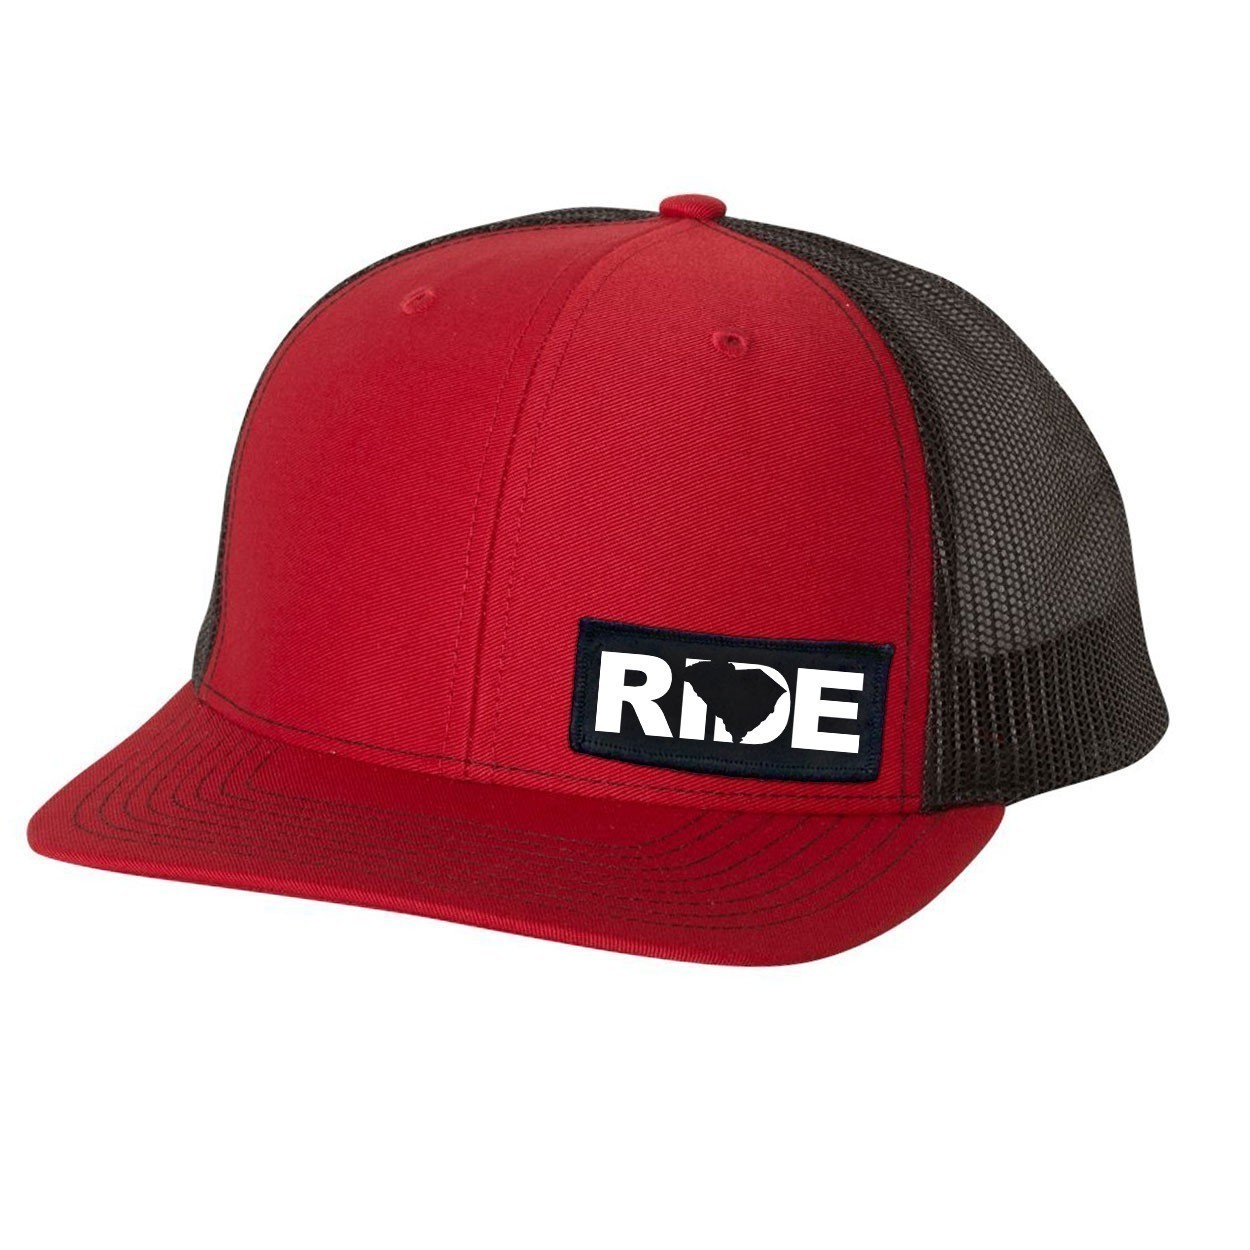 Ride South Carolina Night Out Woven Patch Snapback Trucker Hat Red/Black (White Logo)